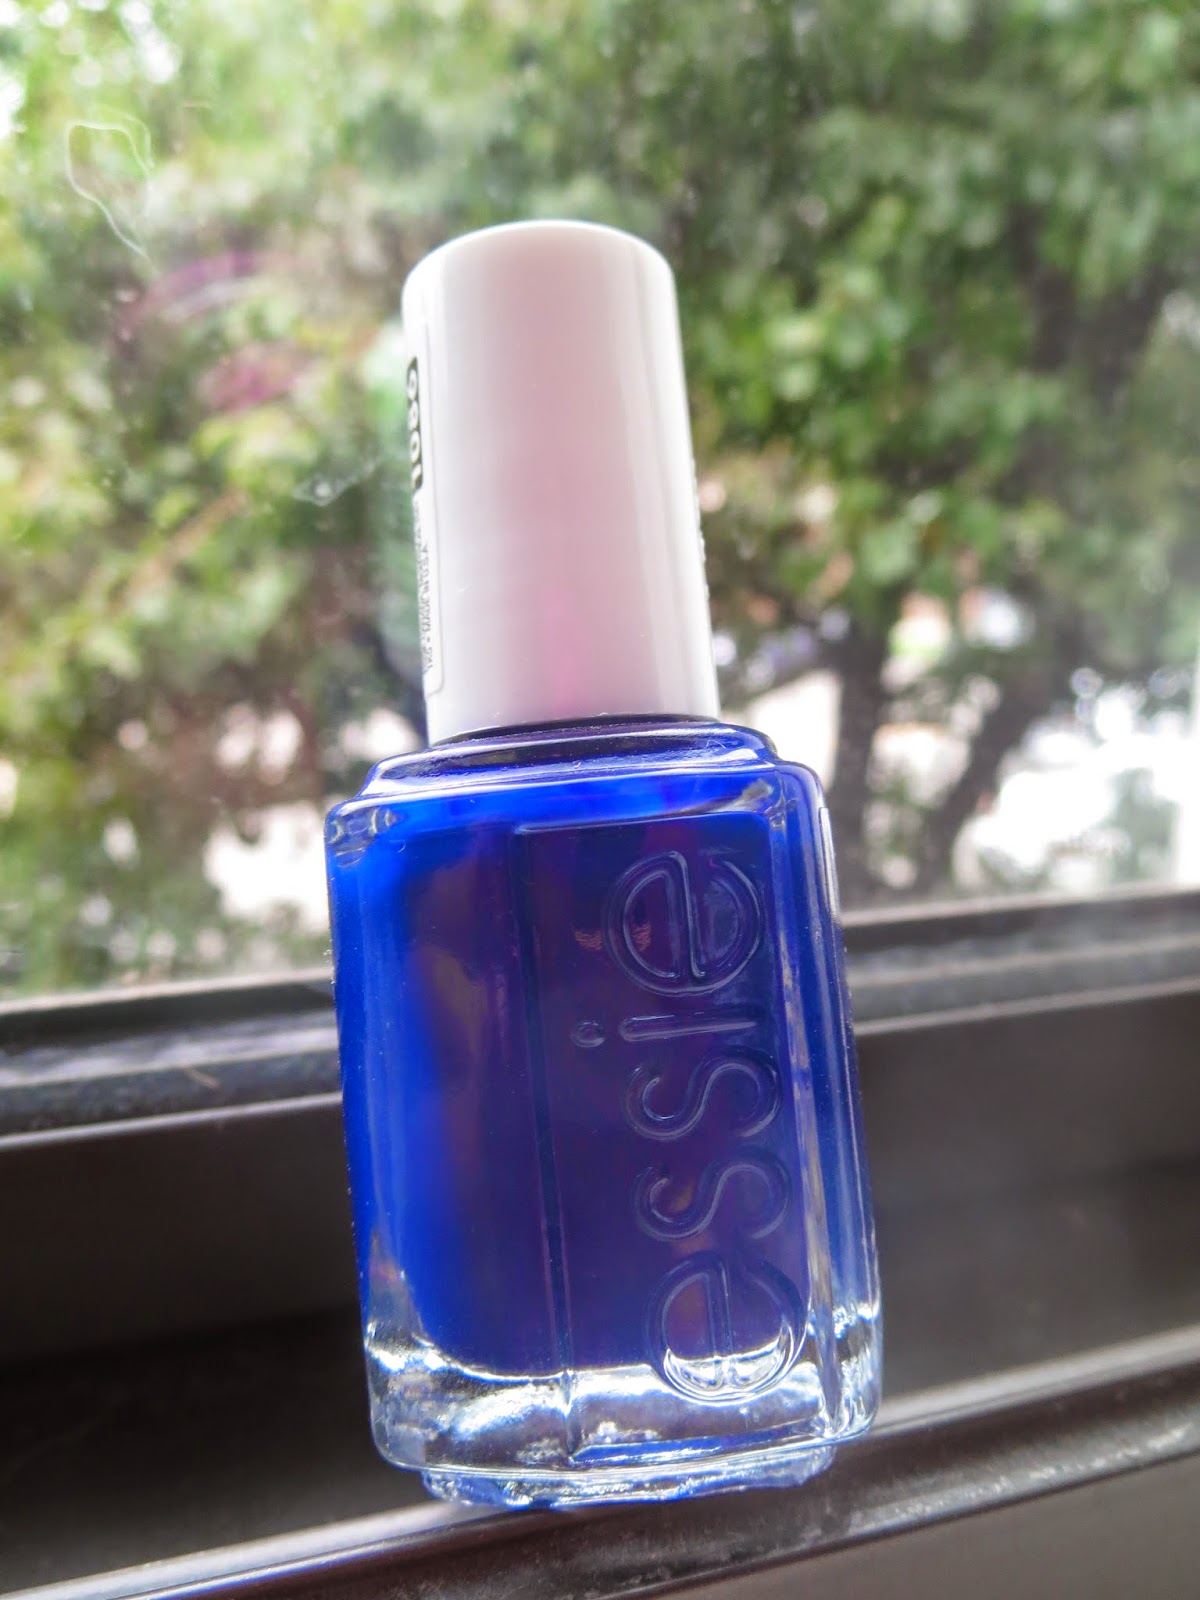 a picture of Essie's Style Cartel nail polish